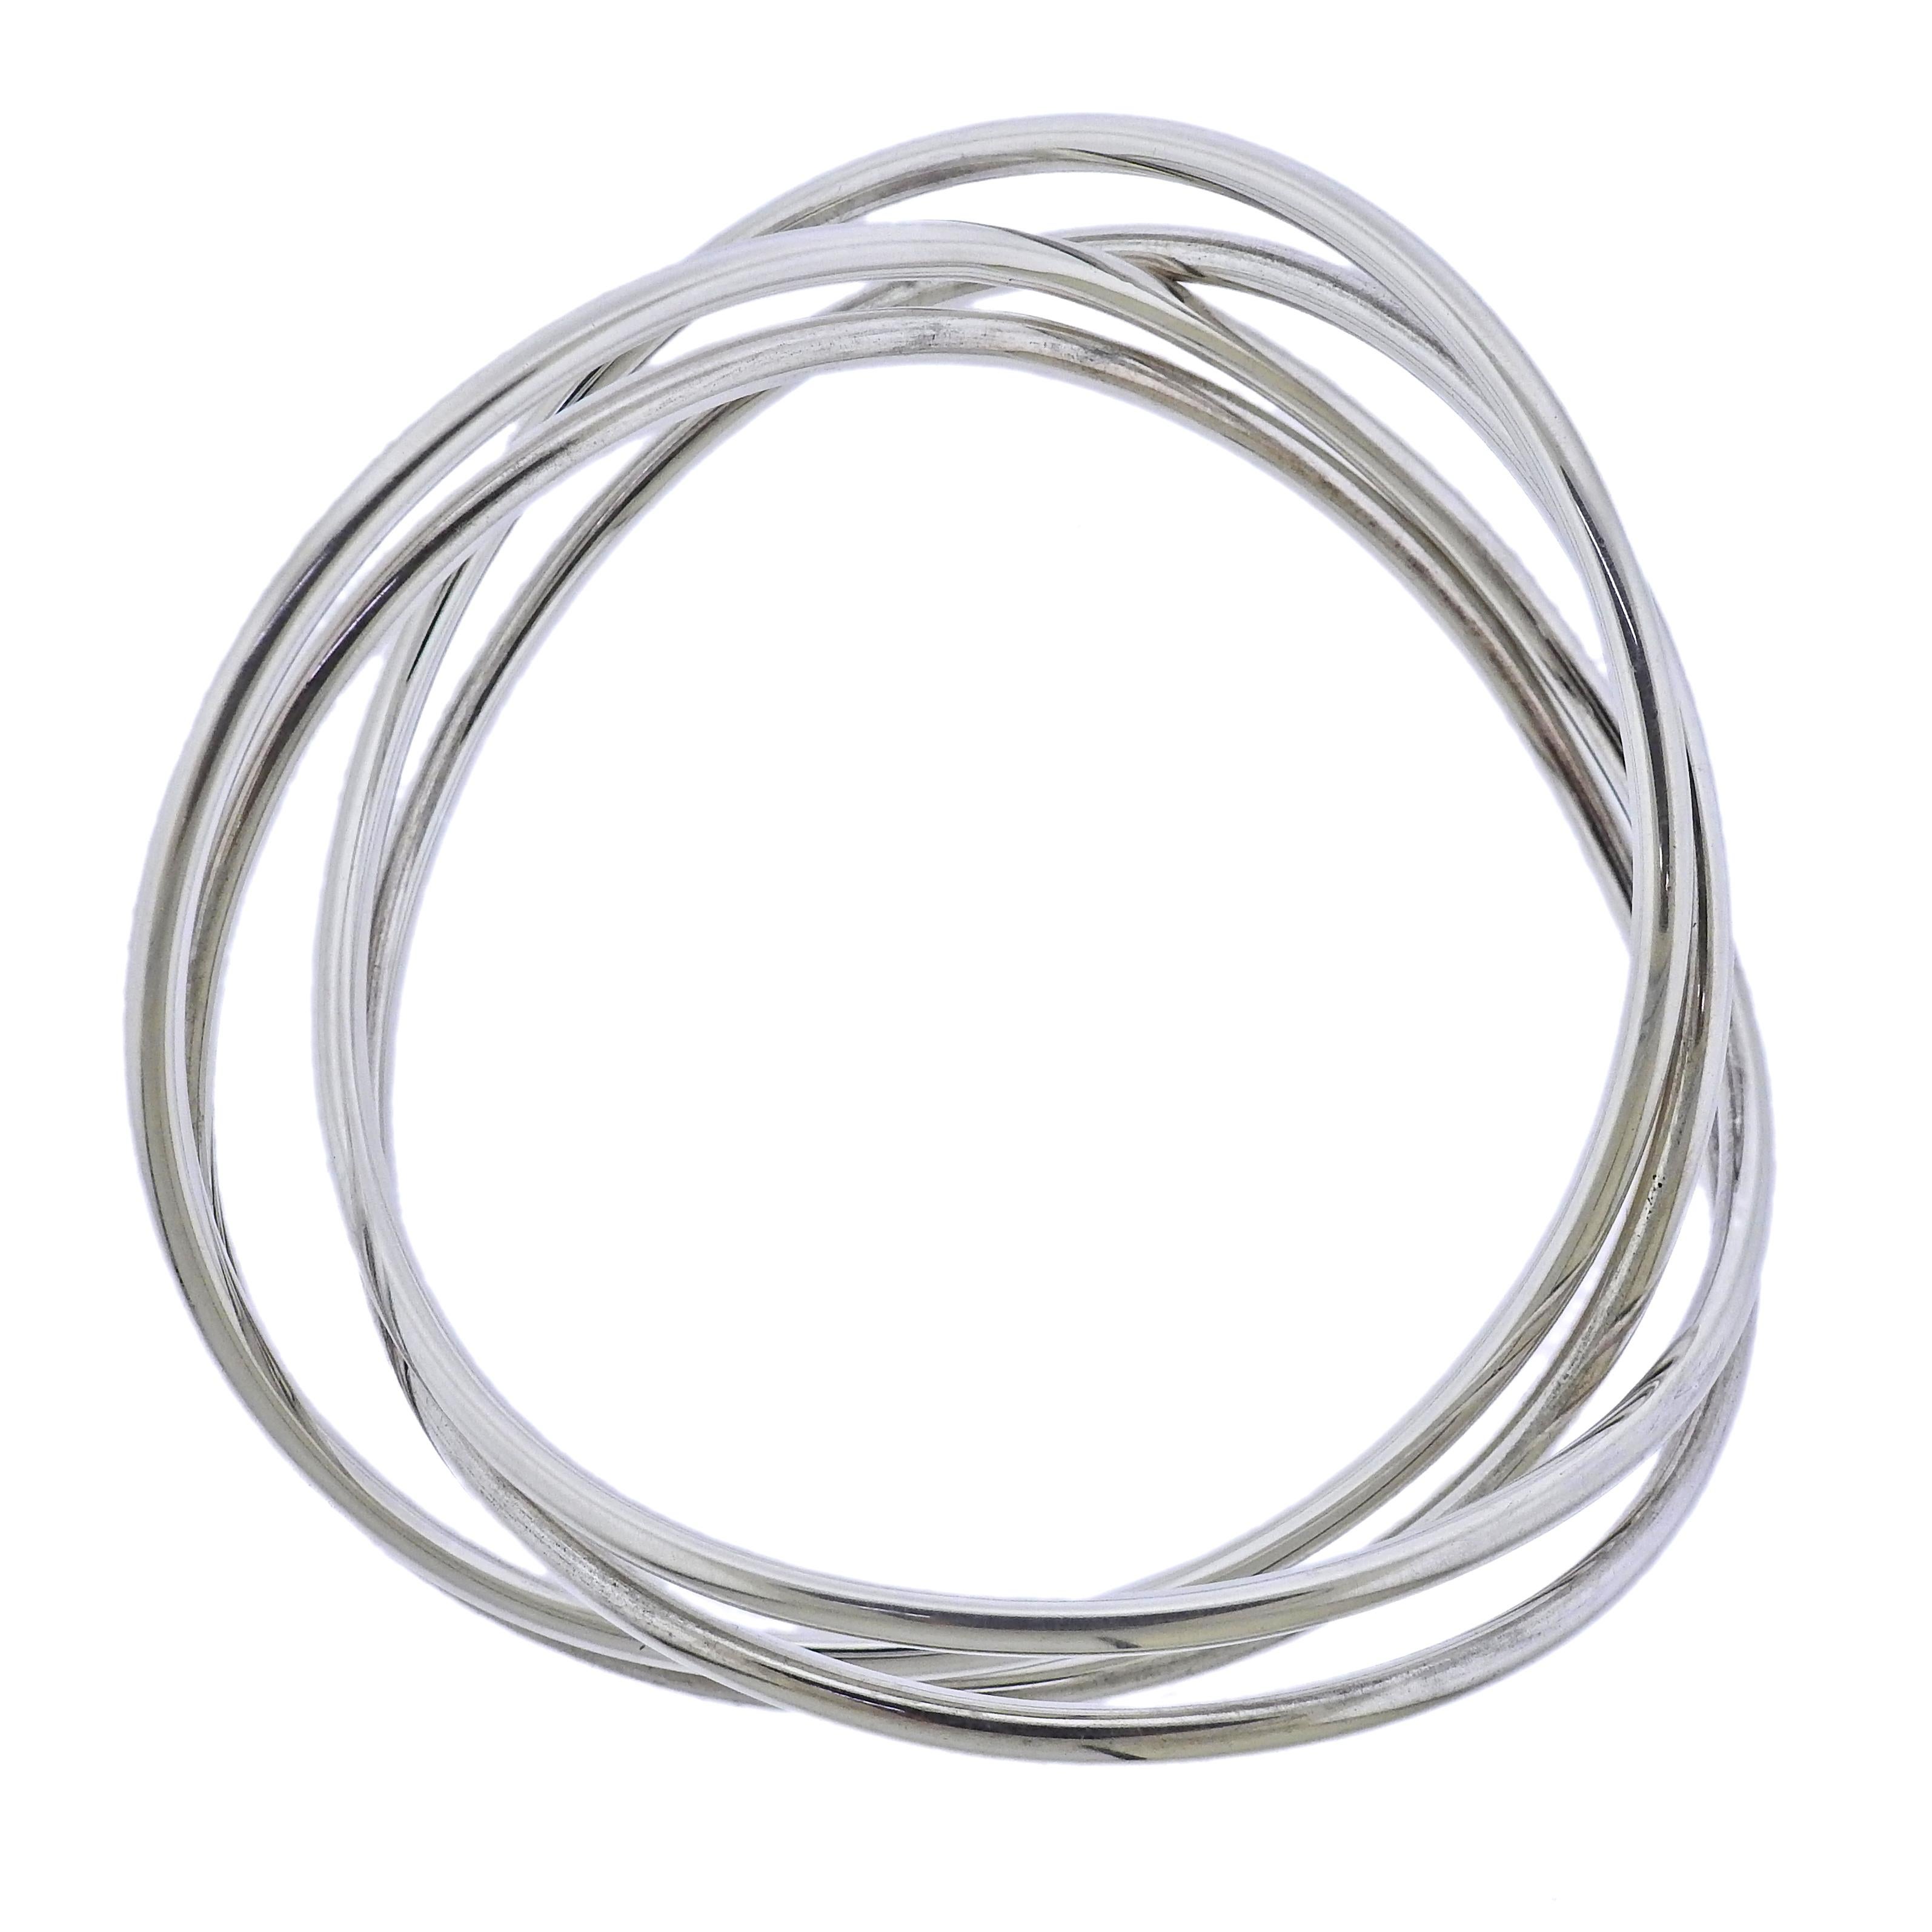 Brand new Georg Jensen sterling silver double bangle Alliance bracelet. Bracelet is available in size L, will fit approx. 7.5-7.75